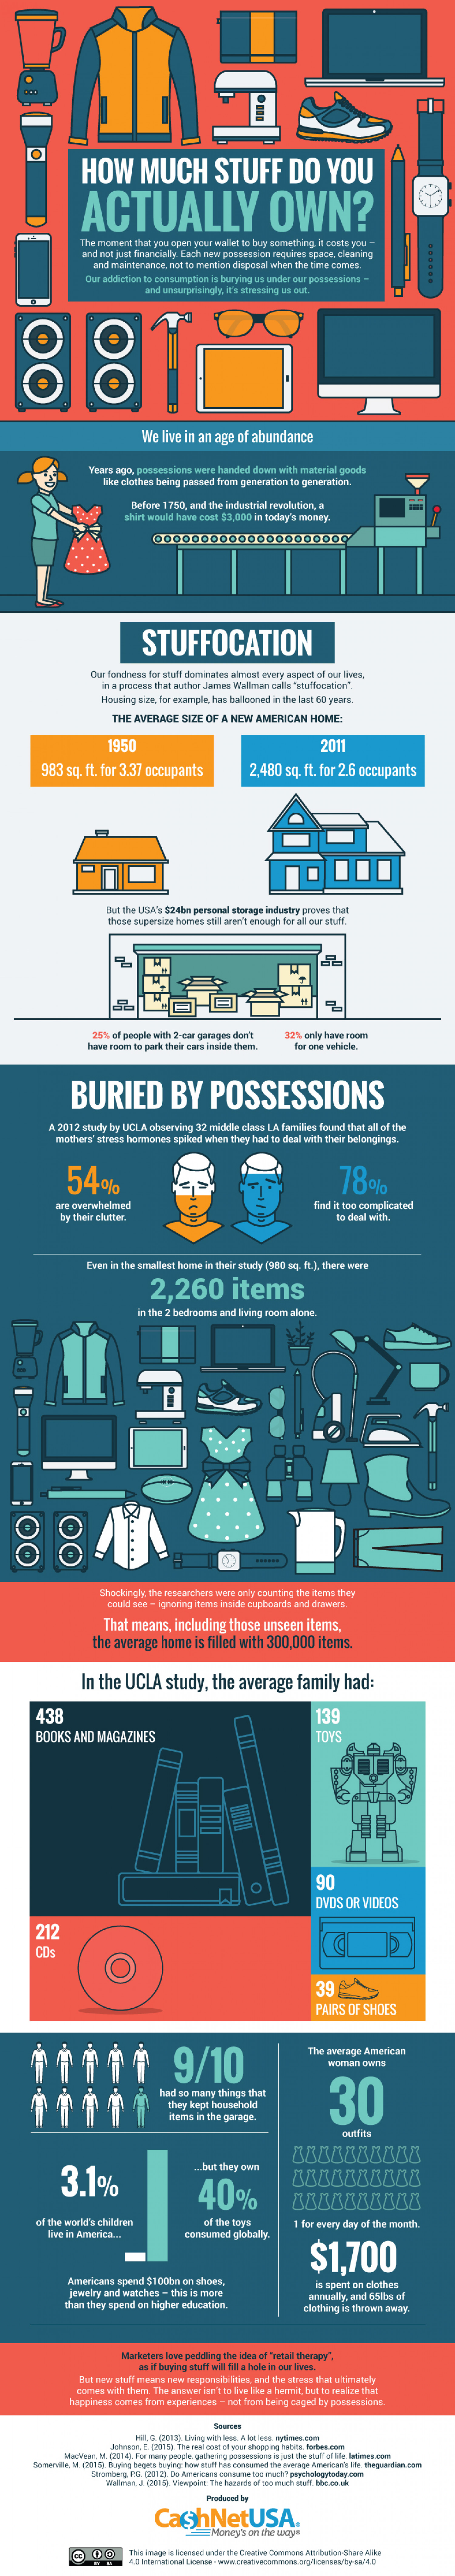 How Much Stuff Do You Actually Own? Infographic